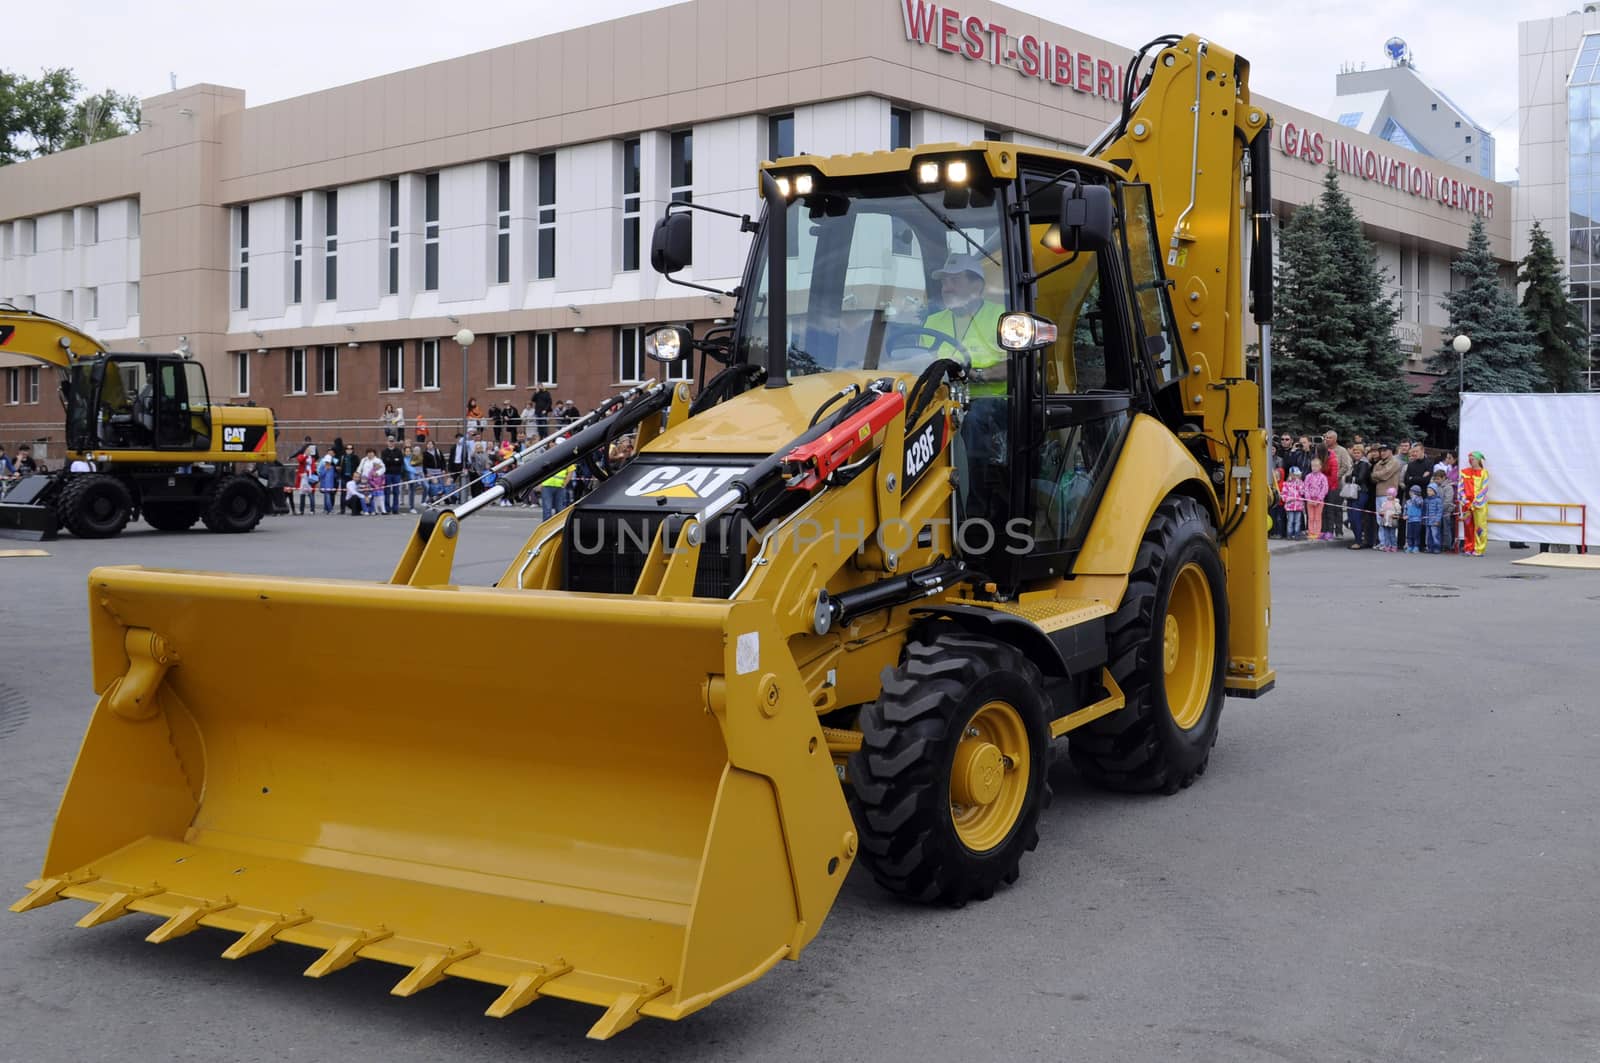 The yellow bulldozer is on the square in the city